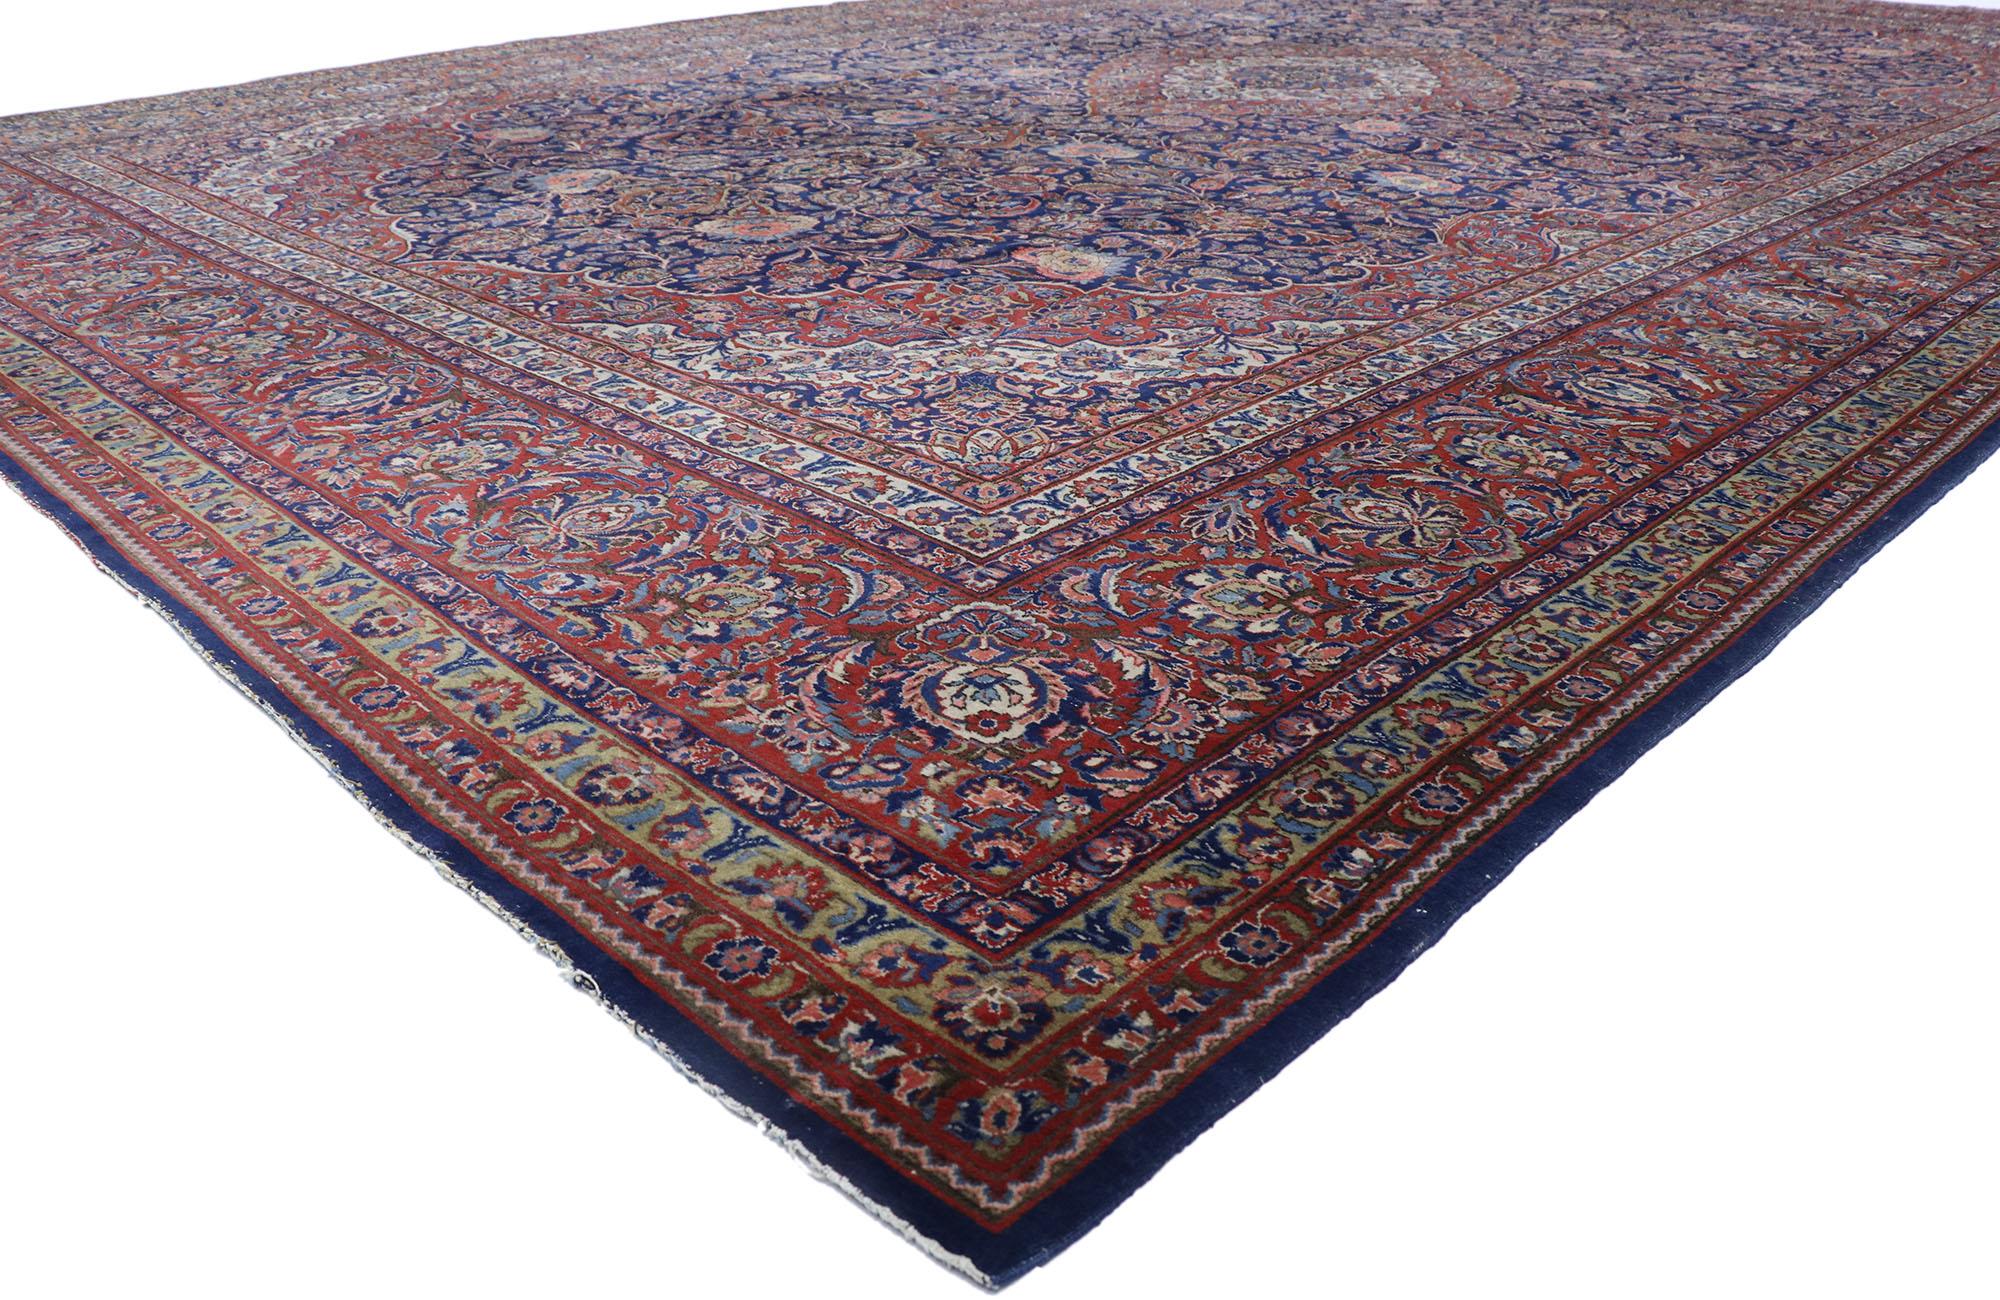 77866 antique Persian Qazvin rug with Victorian style 12'02 x 19'00. Ravishing and vibrant this hand knotted wool antique Persian Mashhad area rug features an elaborate concentric palmette medallion anchored with palmette pendants at either end